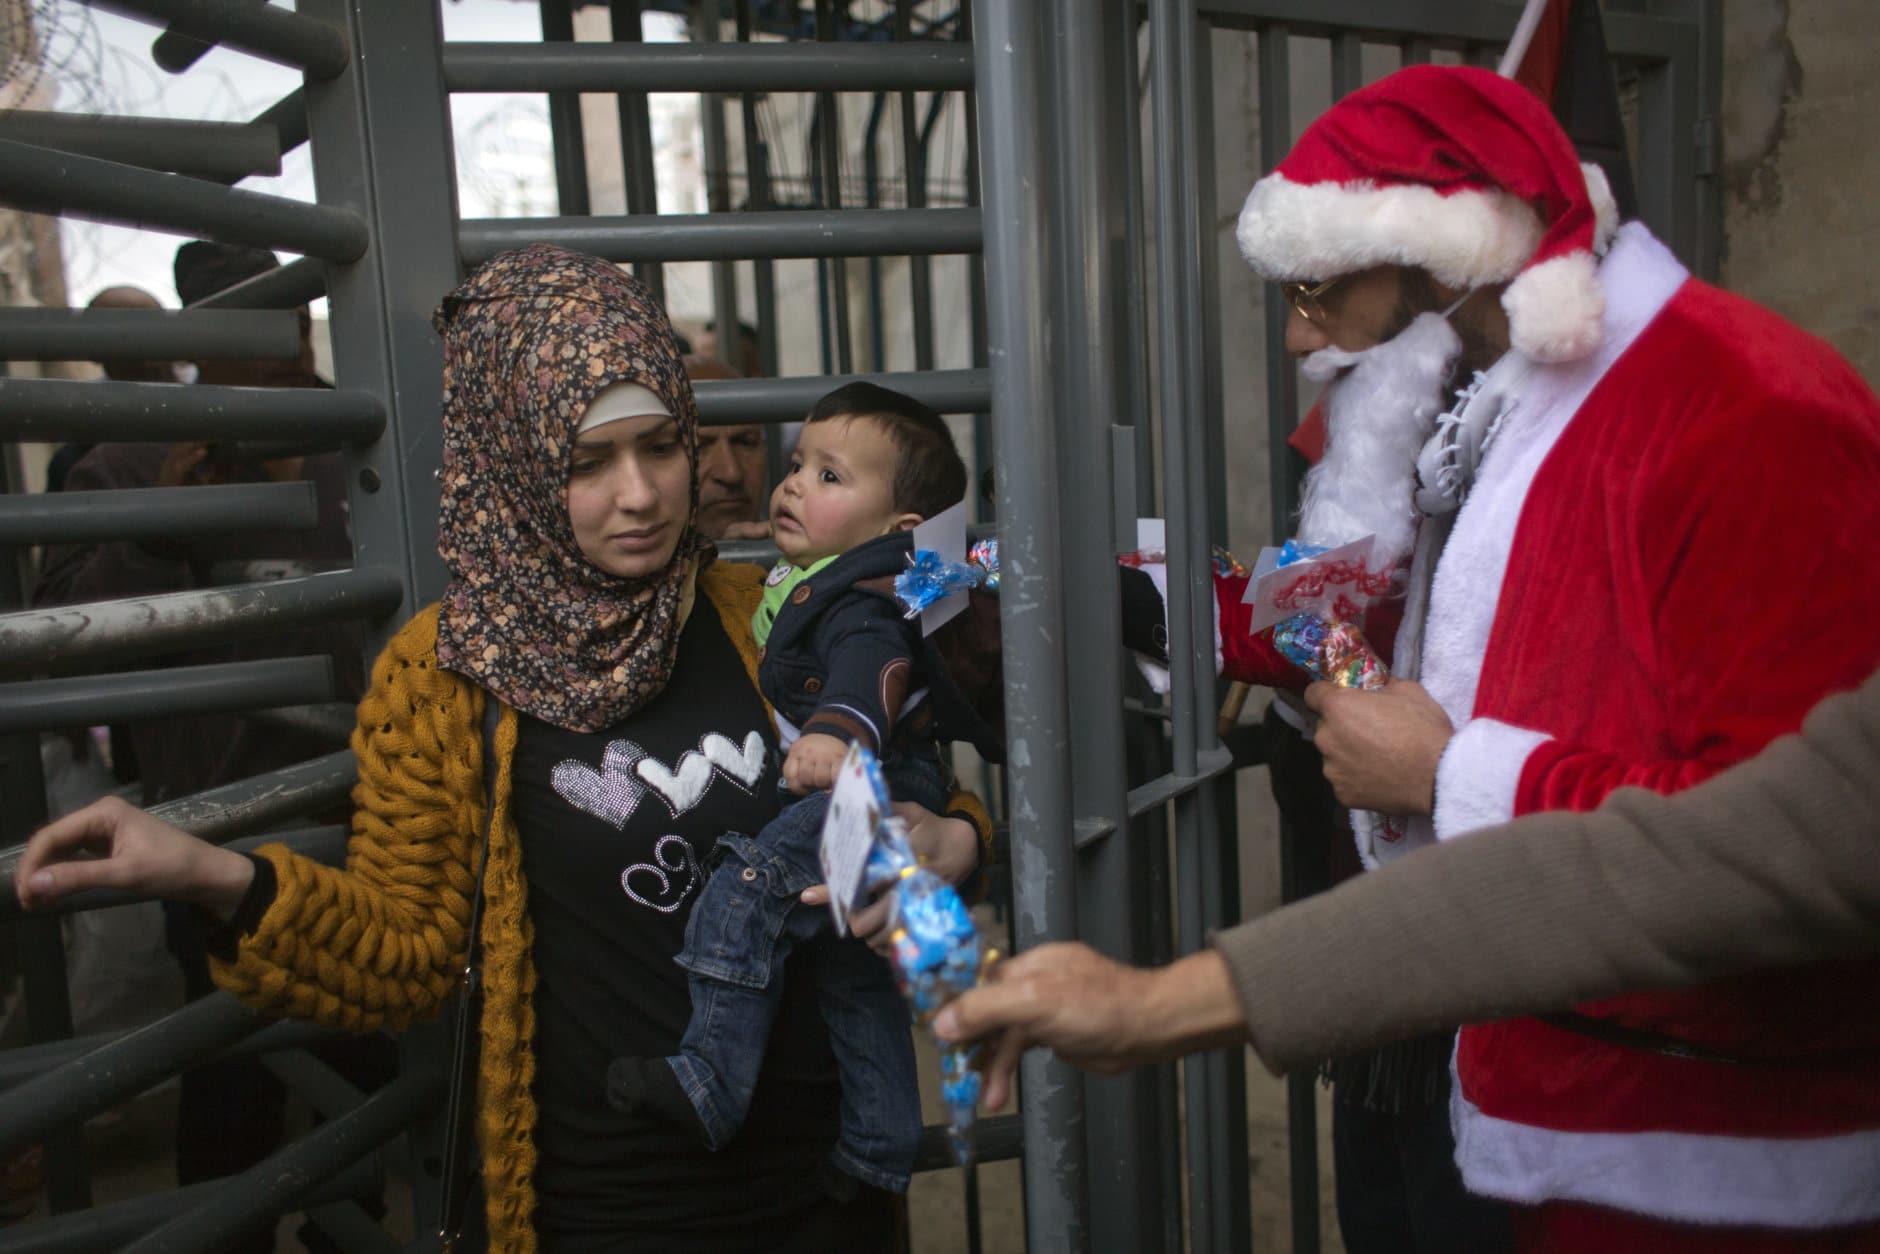 Palestinian protesters, some are dressed as Santa Claus, distribute sweets to people crossing through Israeli security gates during a protest in front of an Israeli checkpoint, in the West Bank city of Bethlehem, Sunday, Dec. 23, 2018. Christians around the world will celebrate Christmas on Monday. (AP Photo/Nasser Nasser)